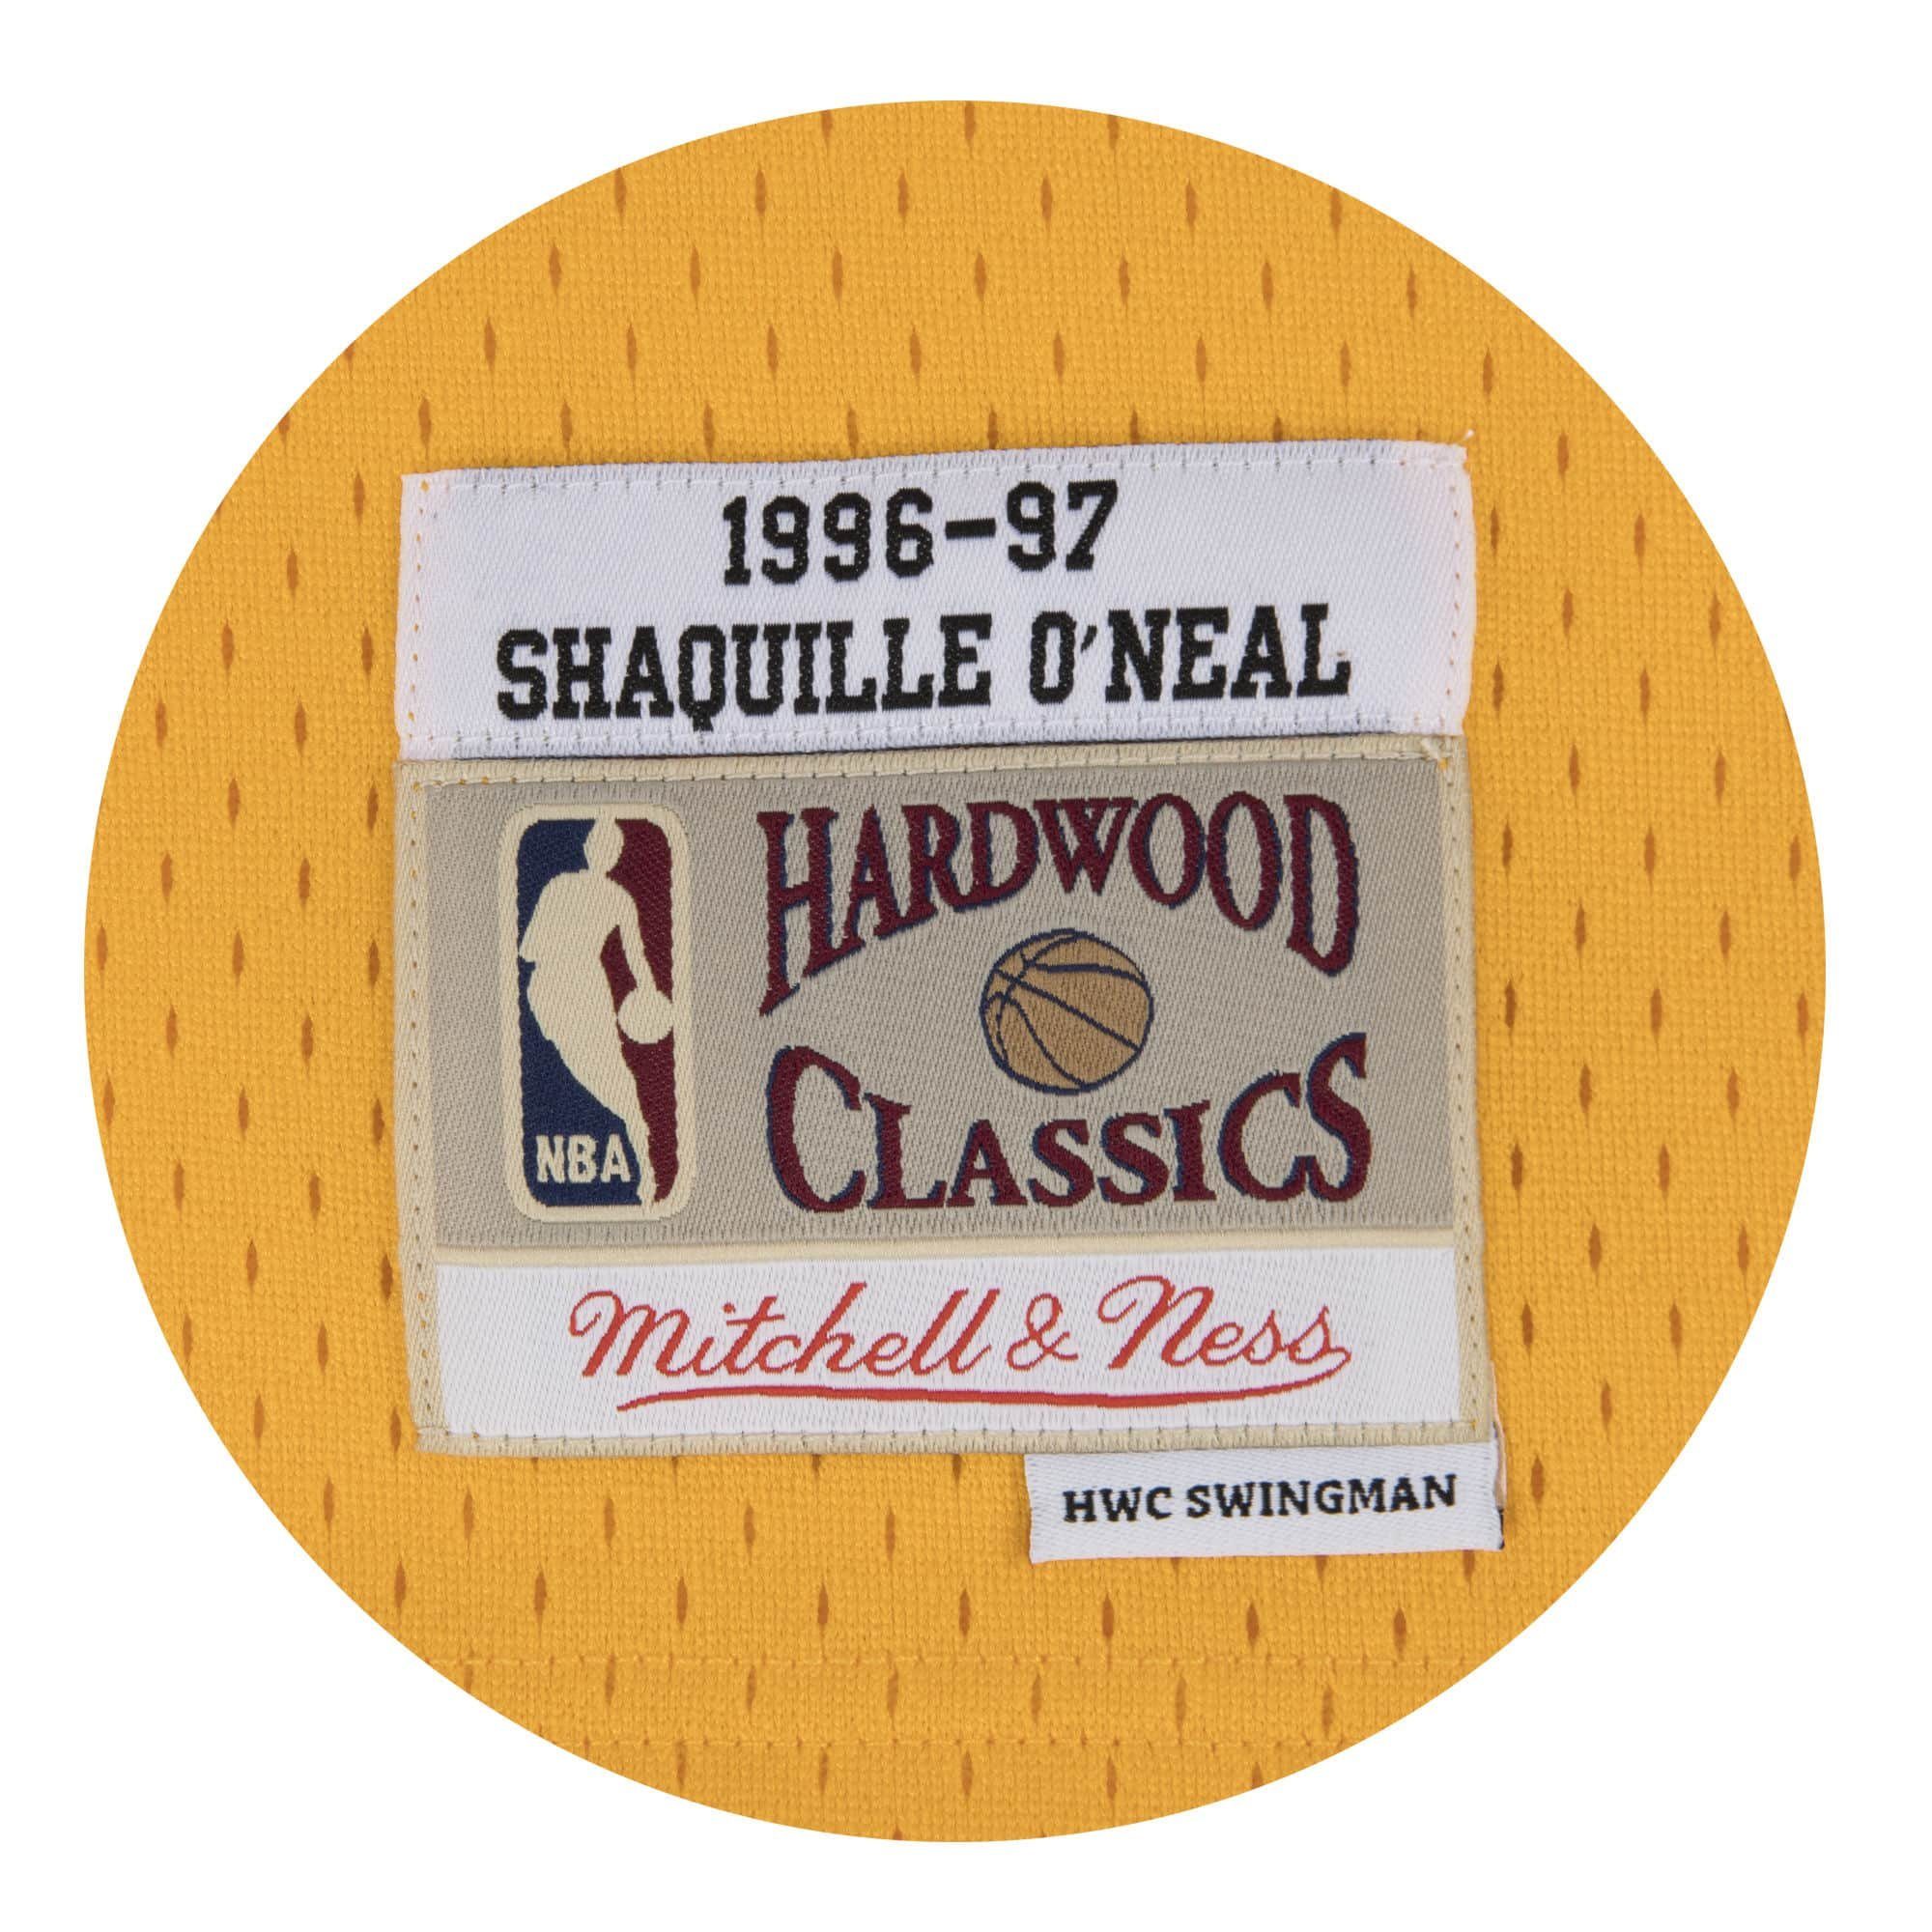 Shaquille Los Ness Home Angeles & Basketballtrikot Mitchell O'Neal 1996-97 Lakers